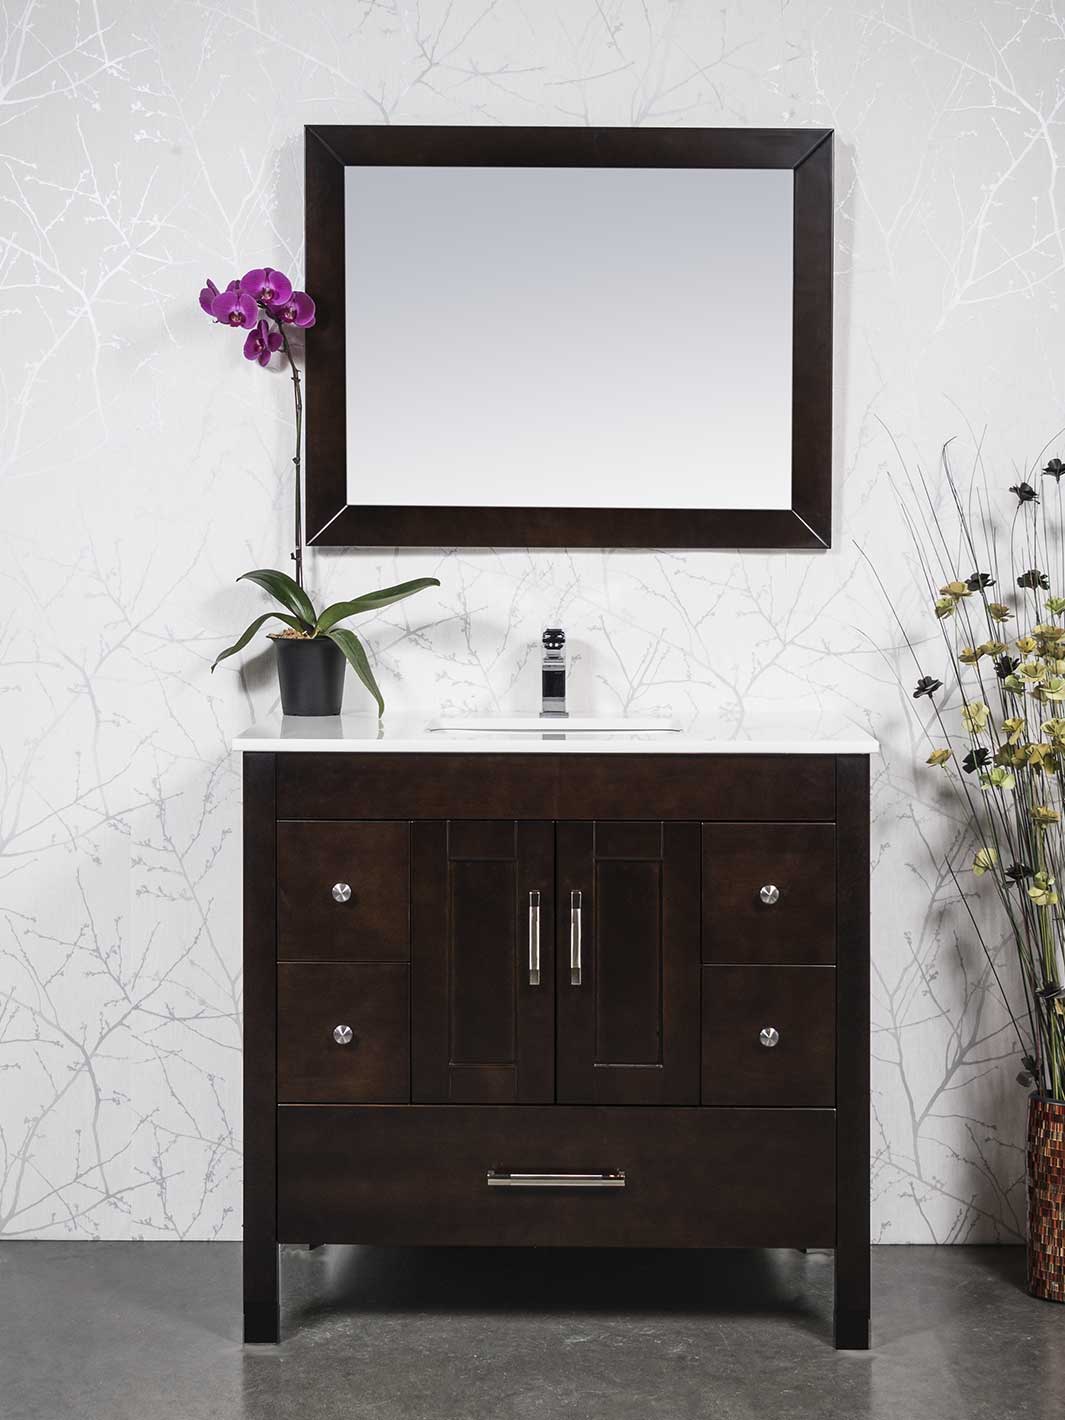 chocolate brown vanity with matching mirror, white counter, chrome faucet and hardware